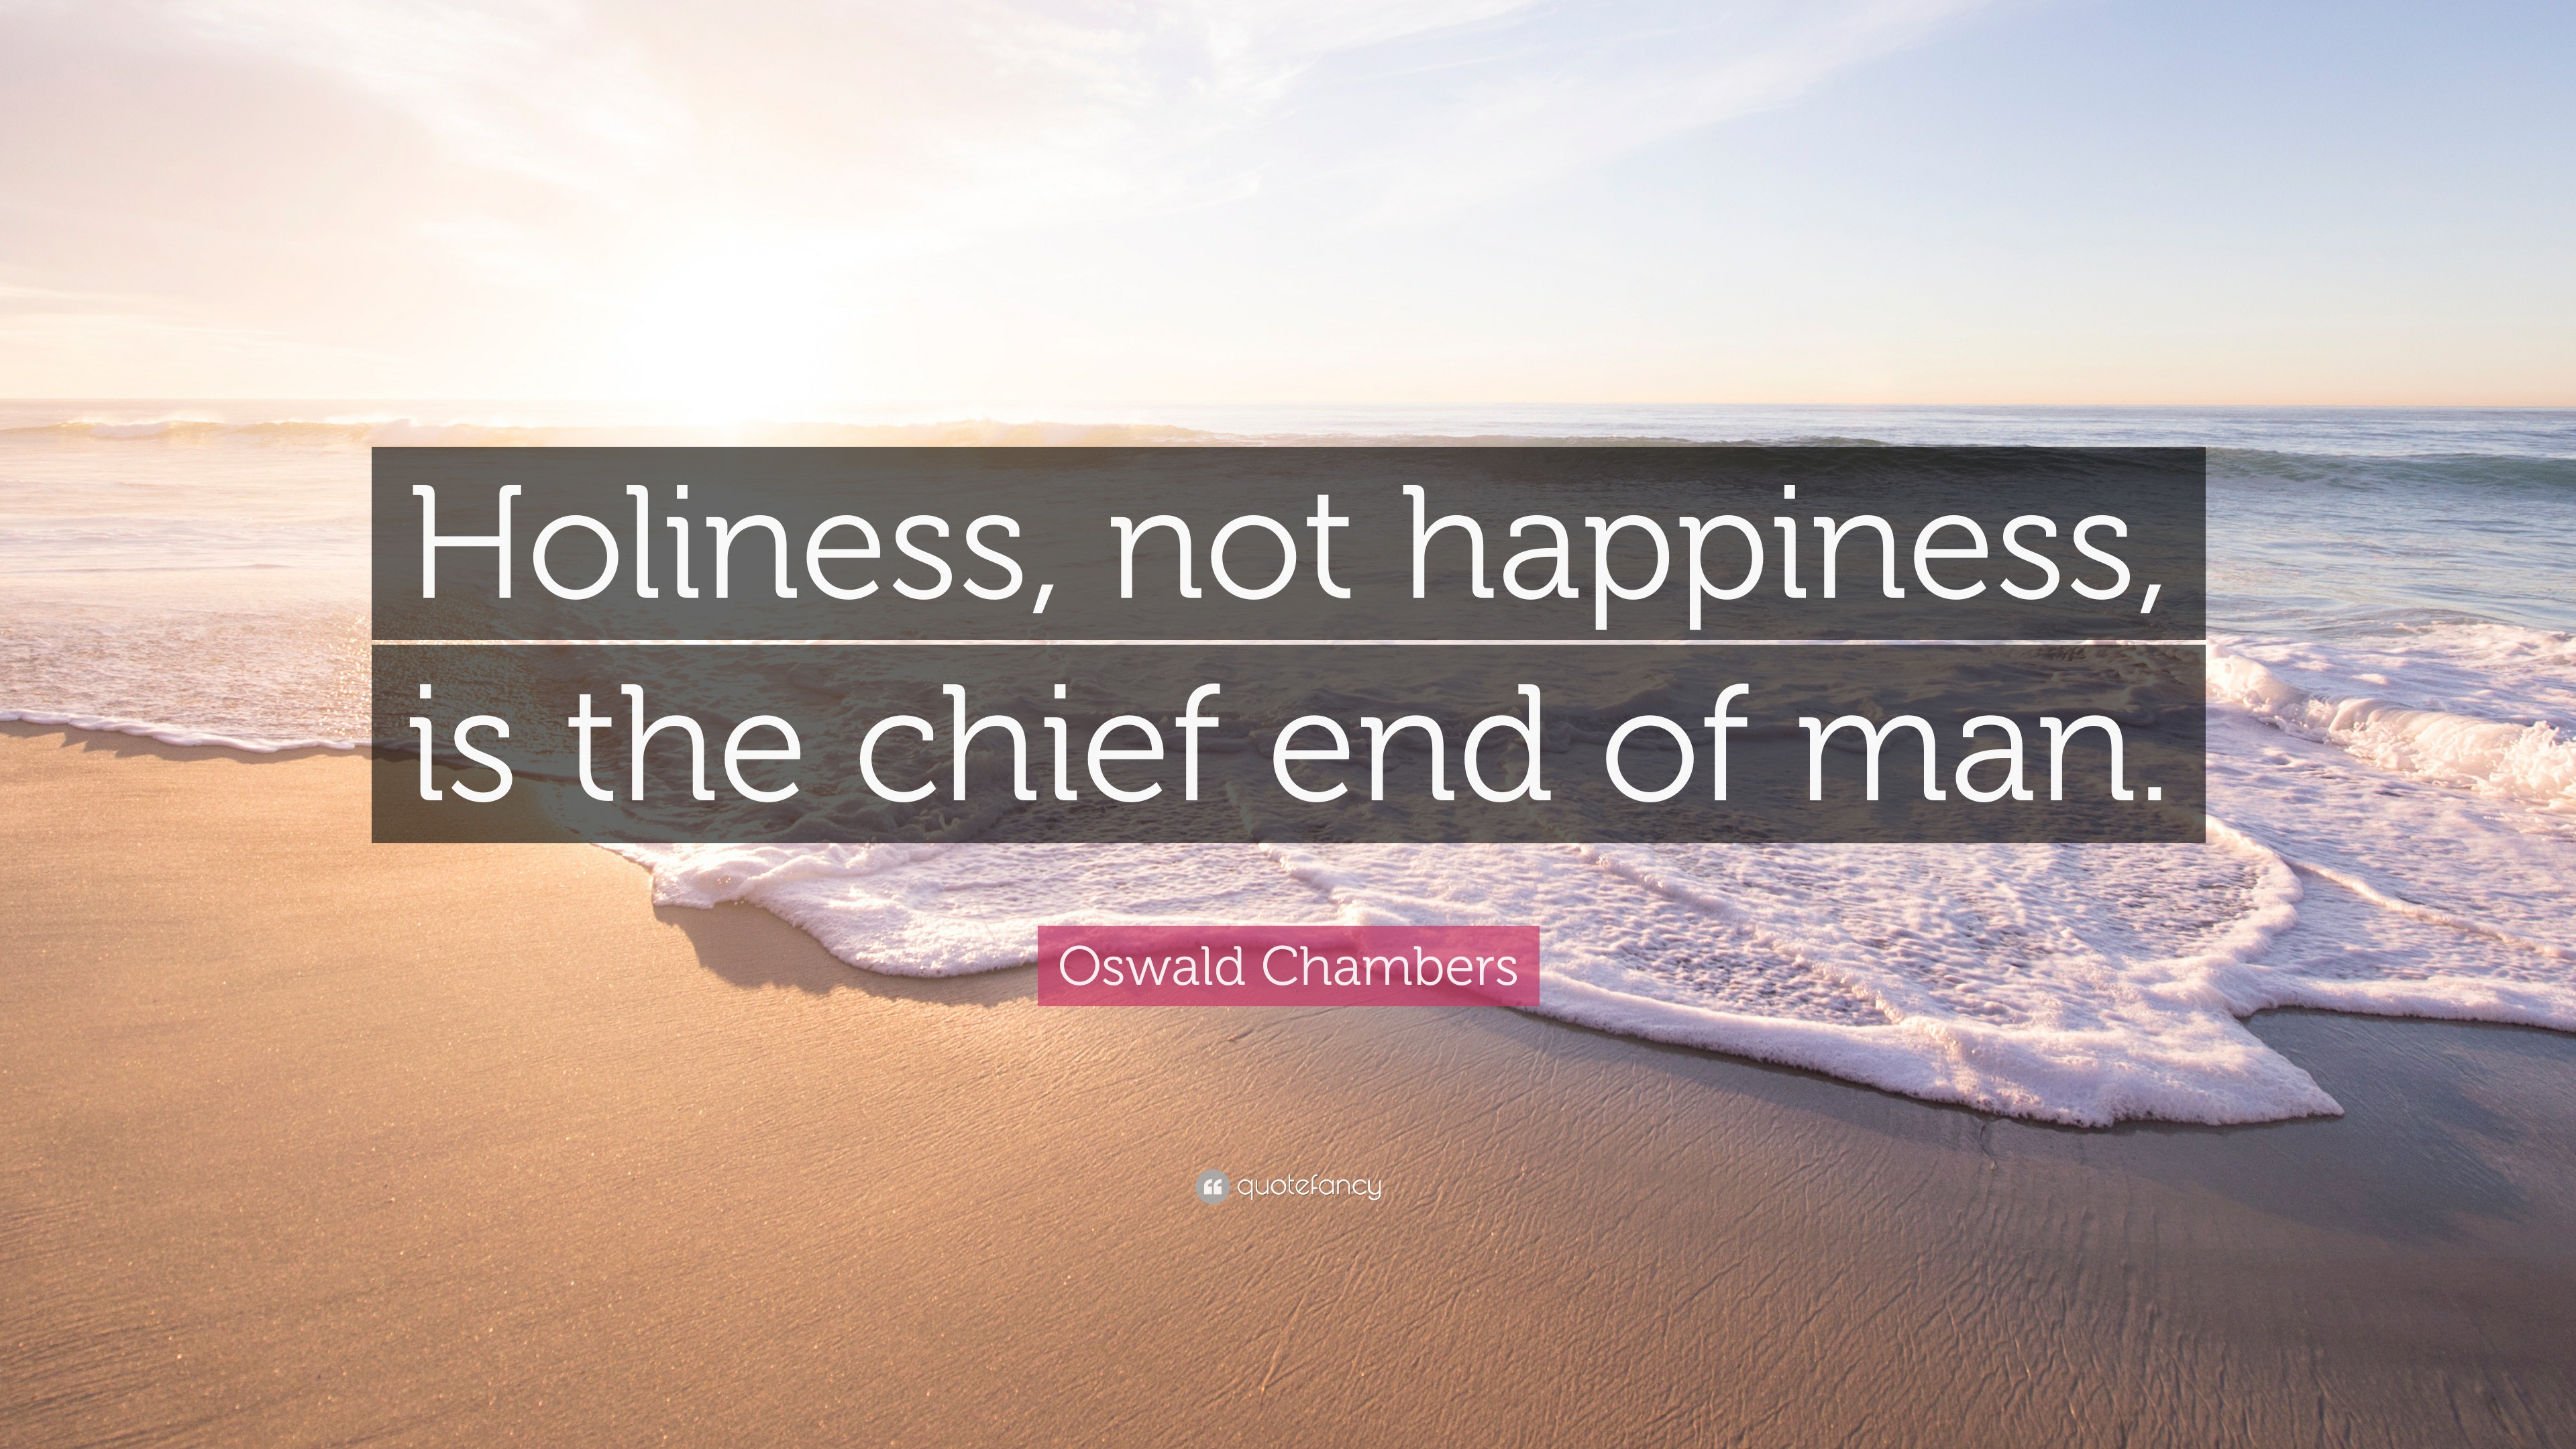 Image result for holiness not happiness is the chief end of man